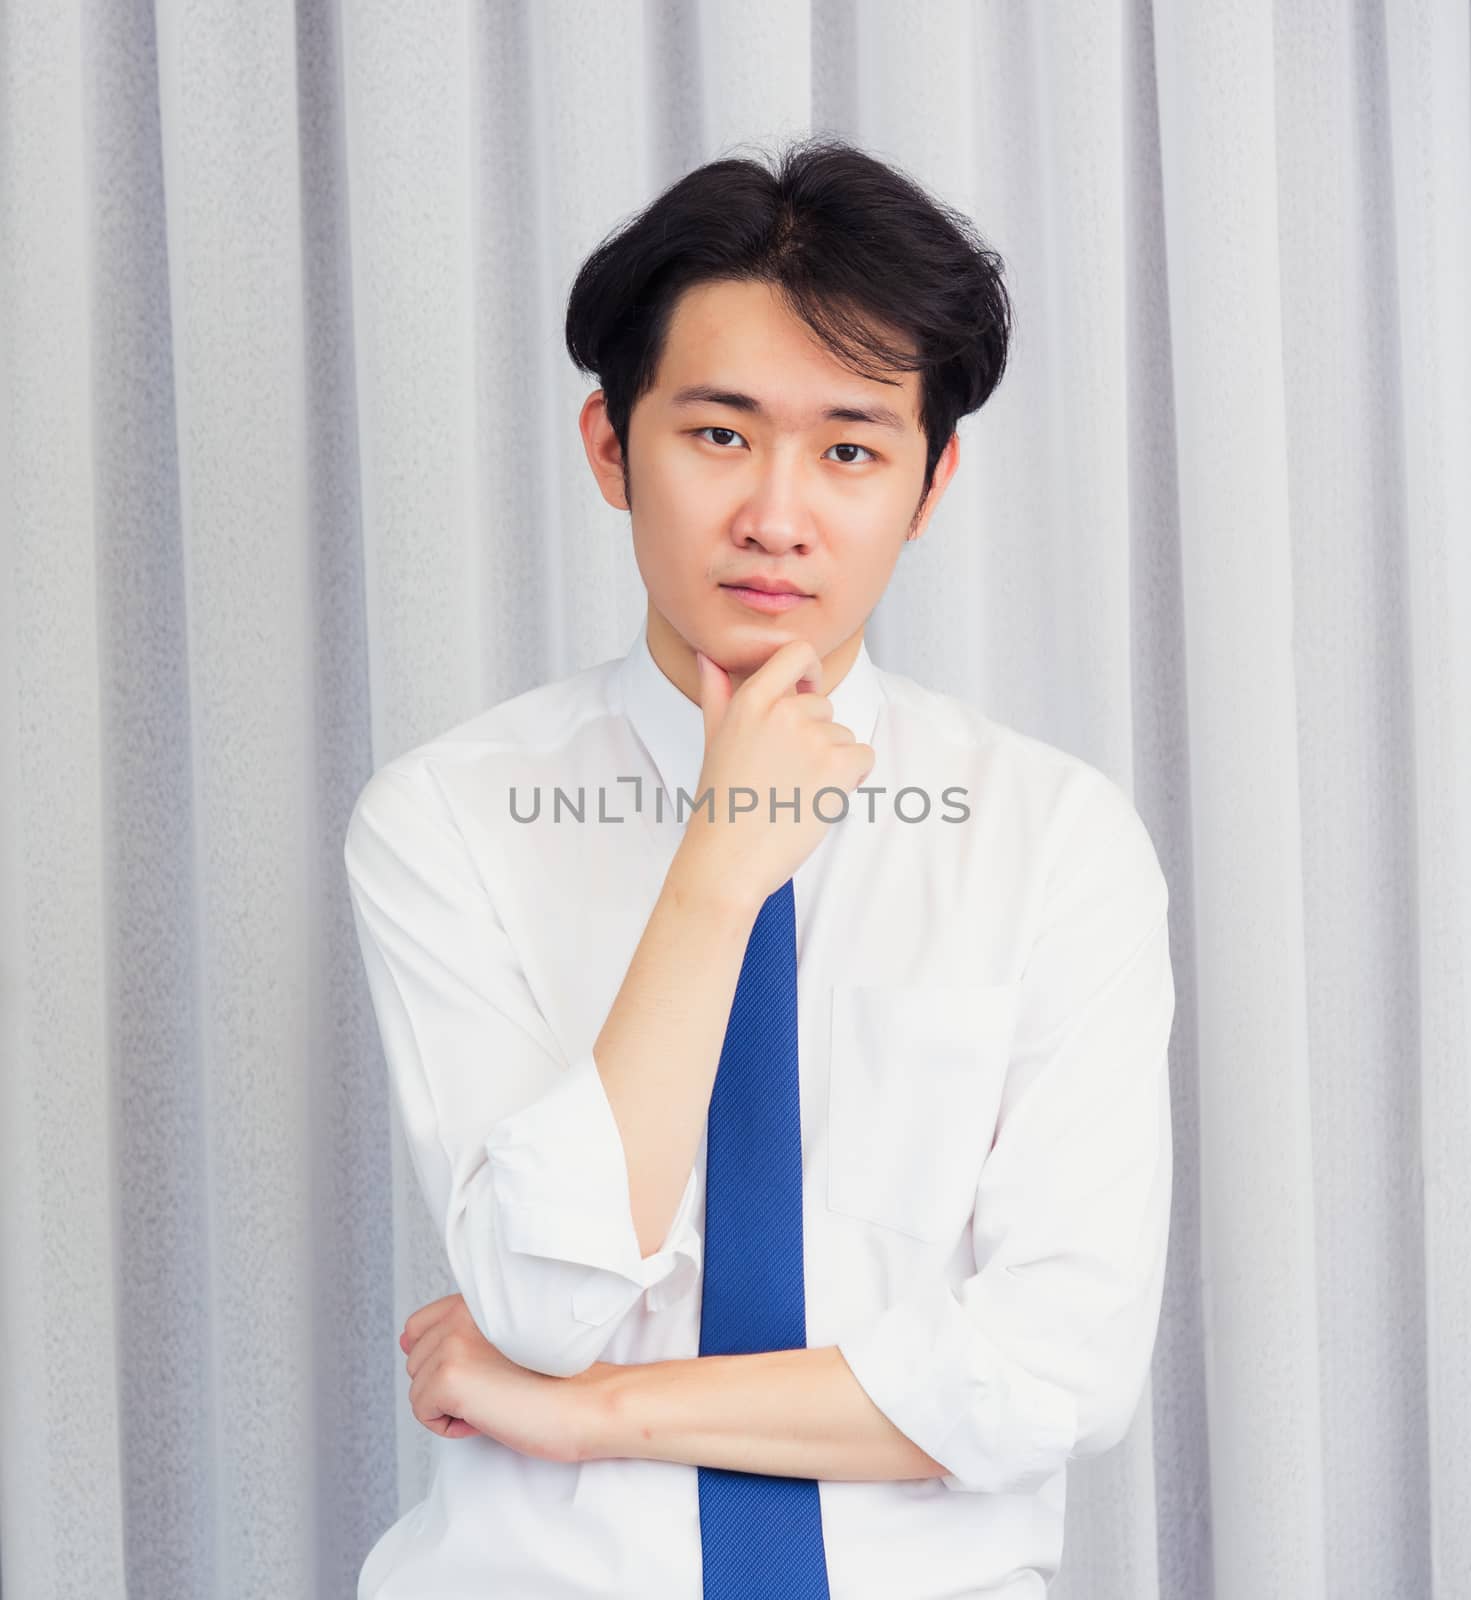 Portrait of happy business handsome man confident wearing shirt pose standing smiling looking to camera he take the hand to hold the chin